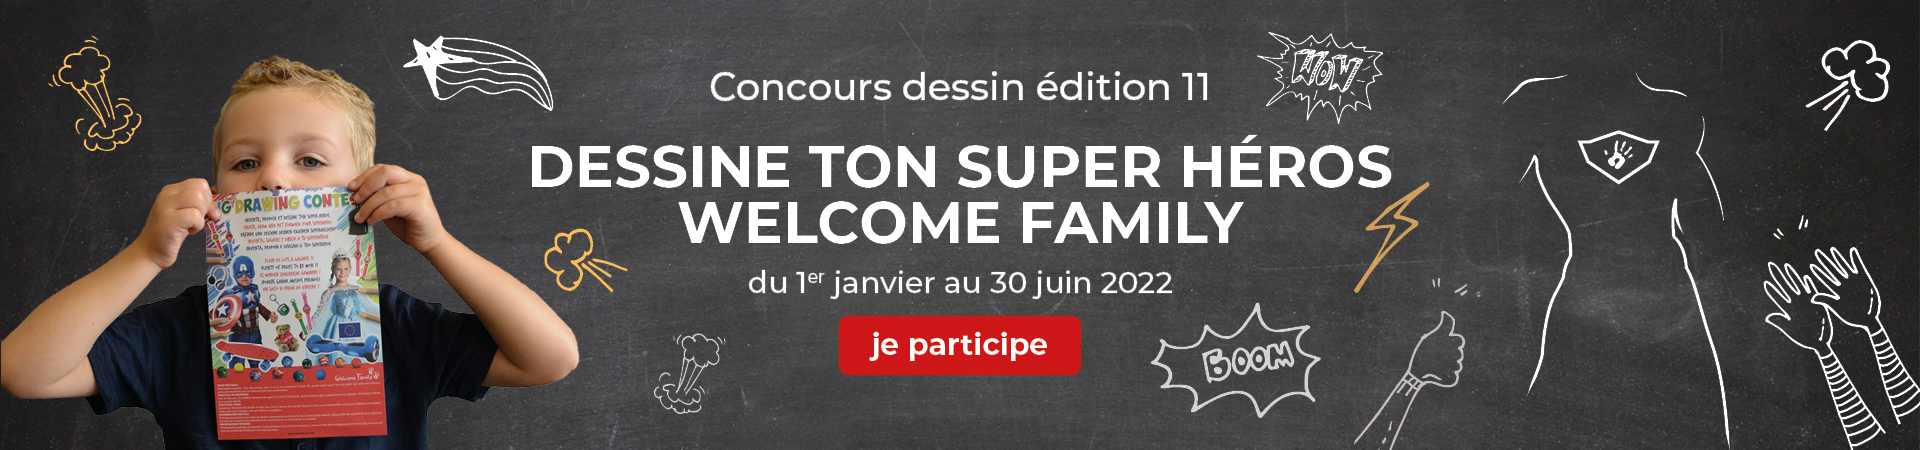 Concours dessin Welcome Family édition 11